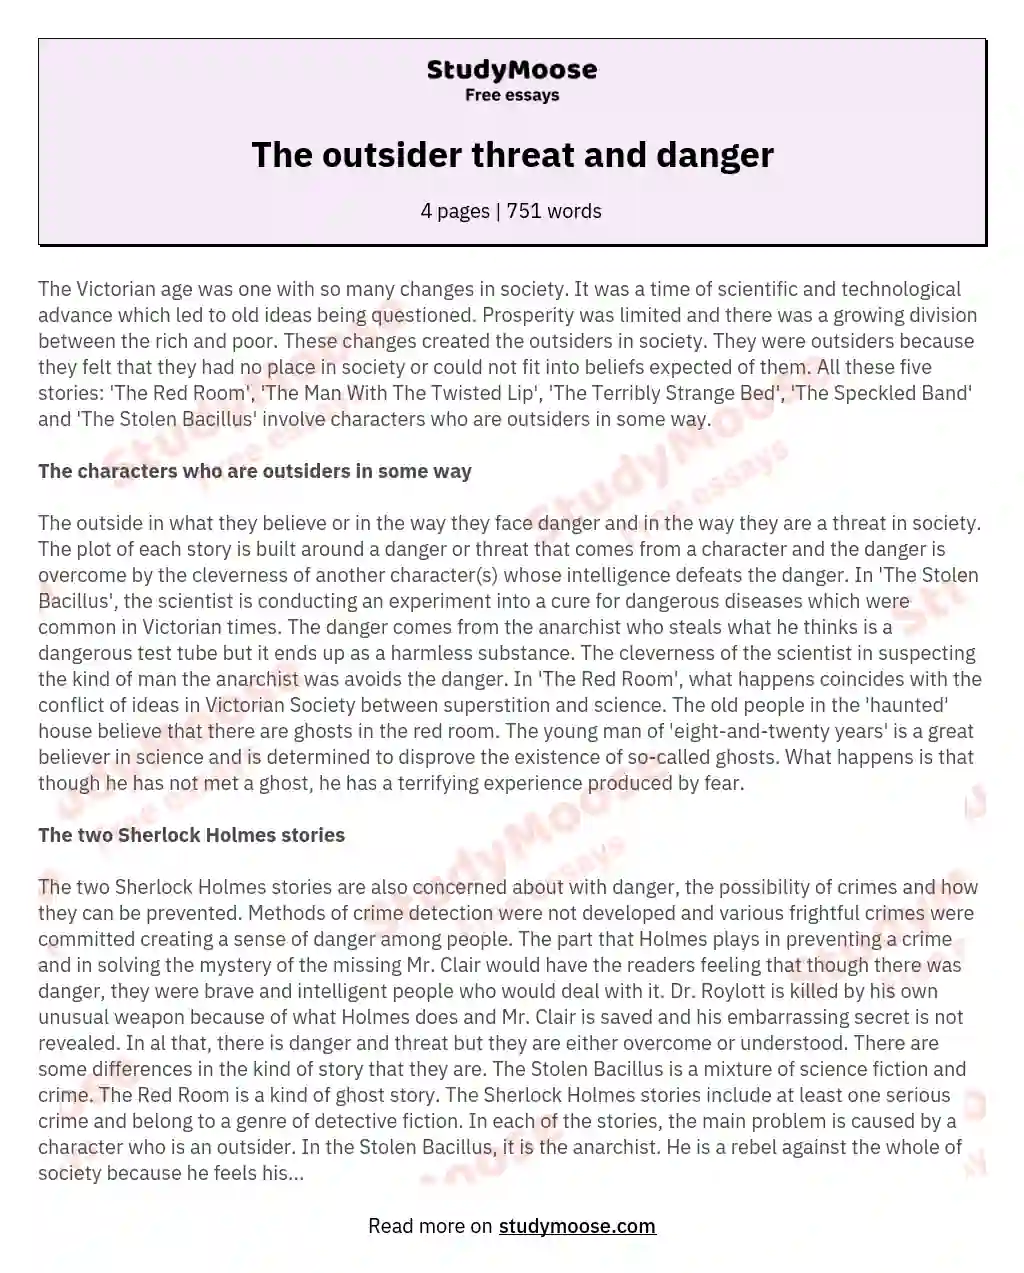 The outsider threat and danger